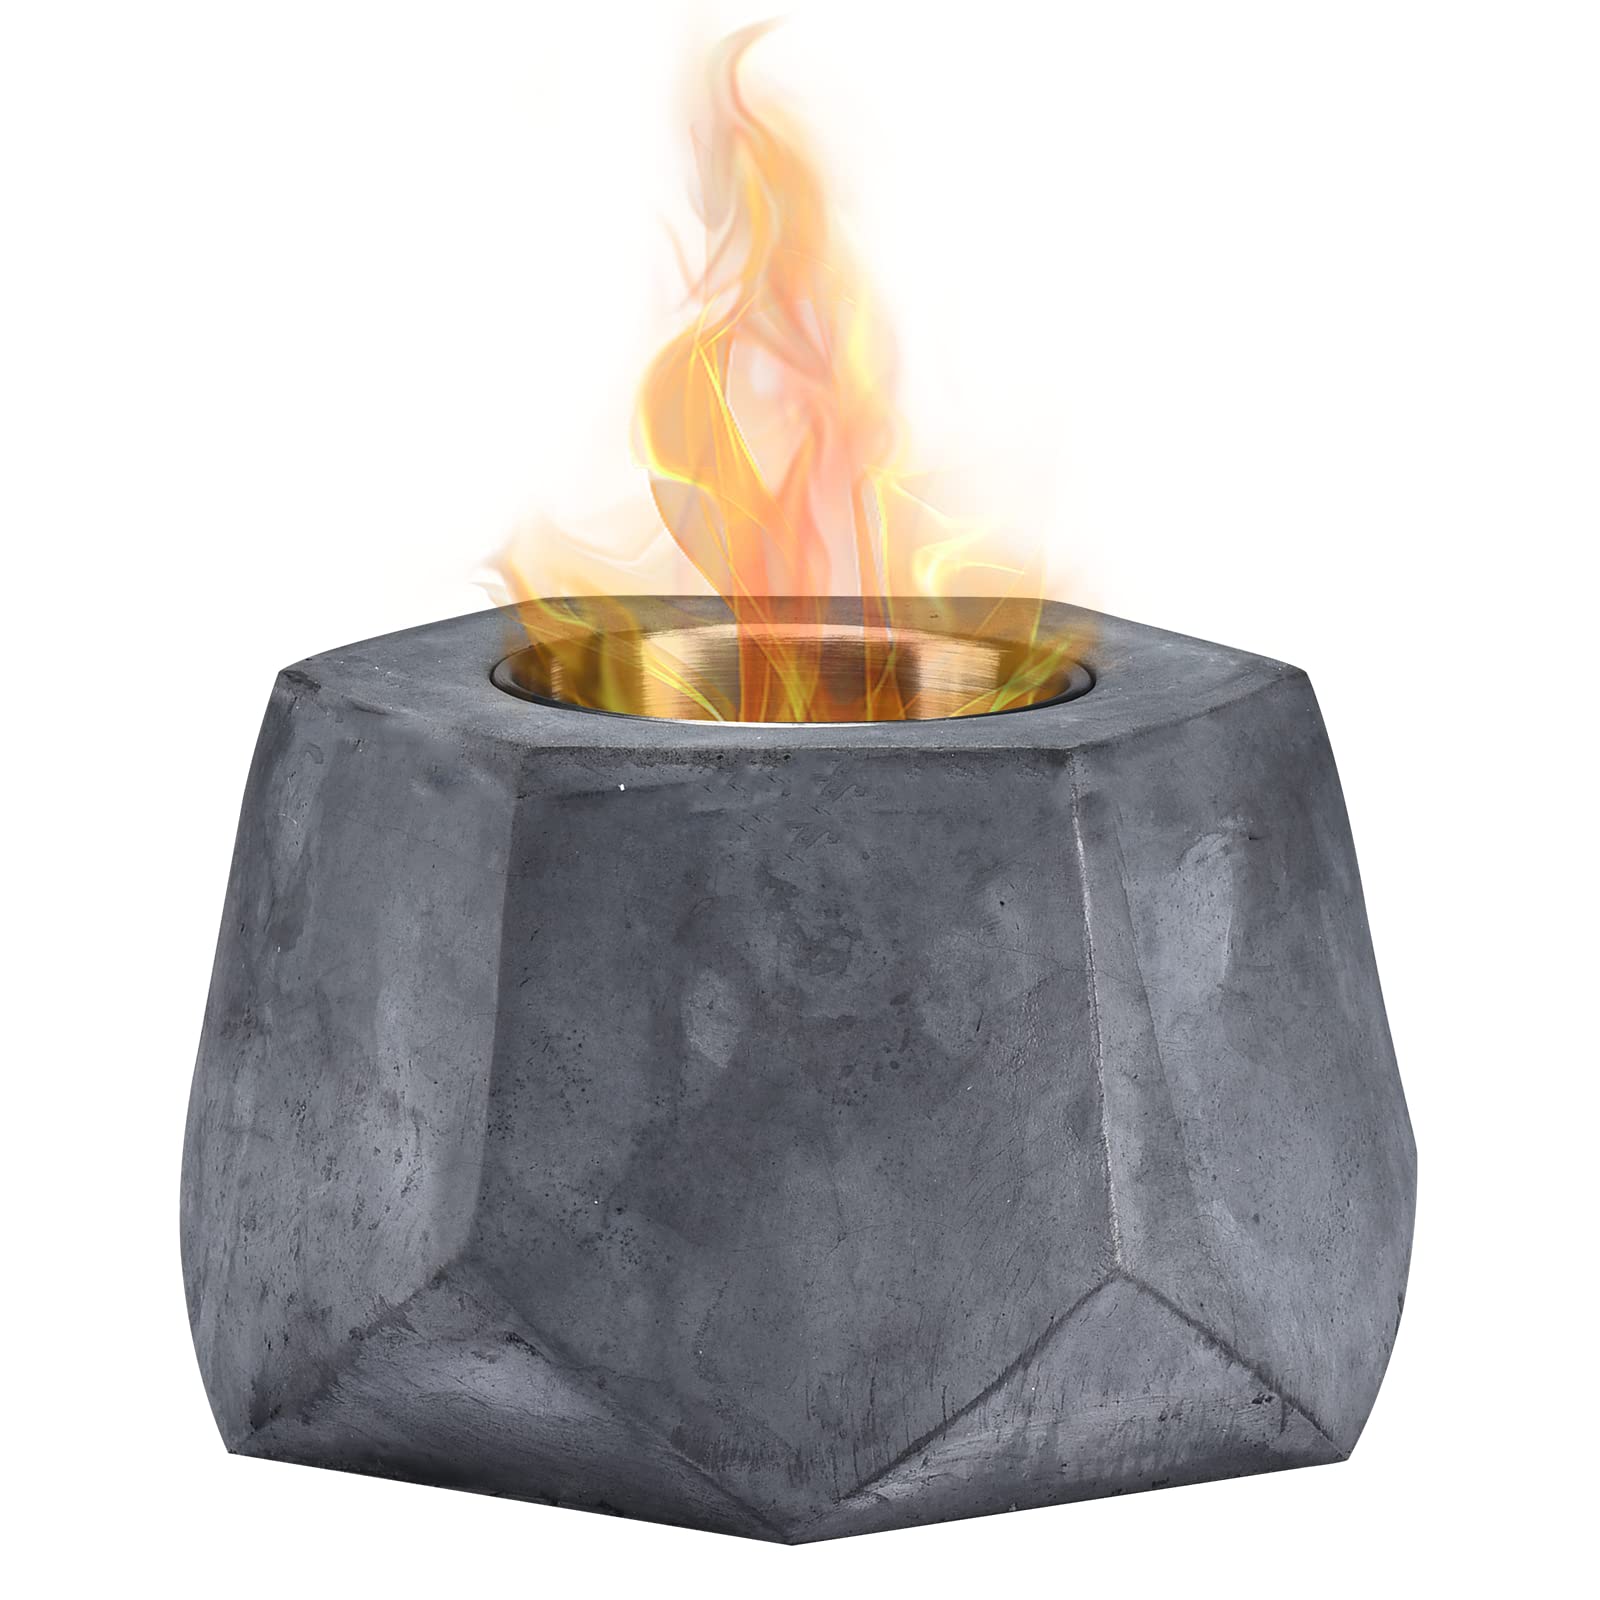 ROUNDFIRE Faceted Hex Concrete Tabletop Fire Pit - Fire Bowl, Portable Fire Pit, Small Personal Fireplace for Indoor and Garden Use